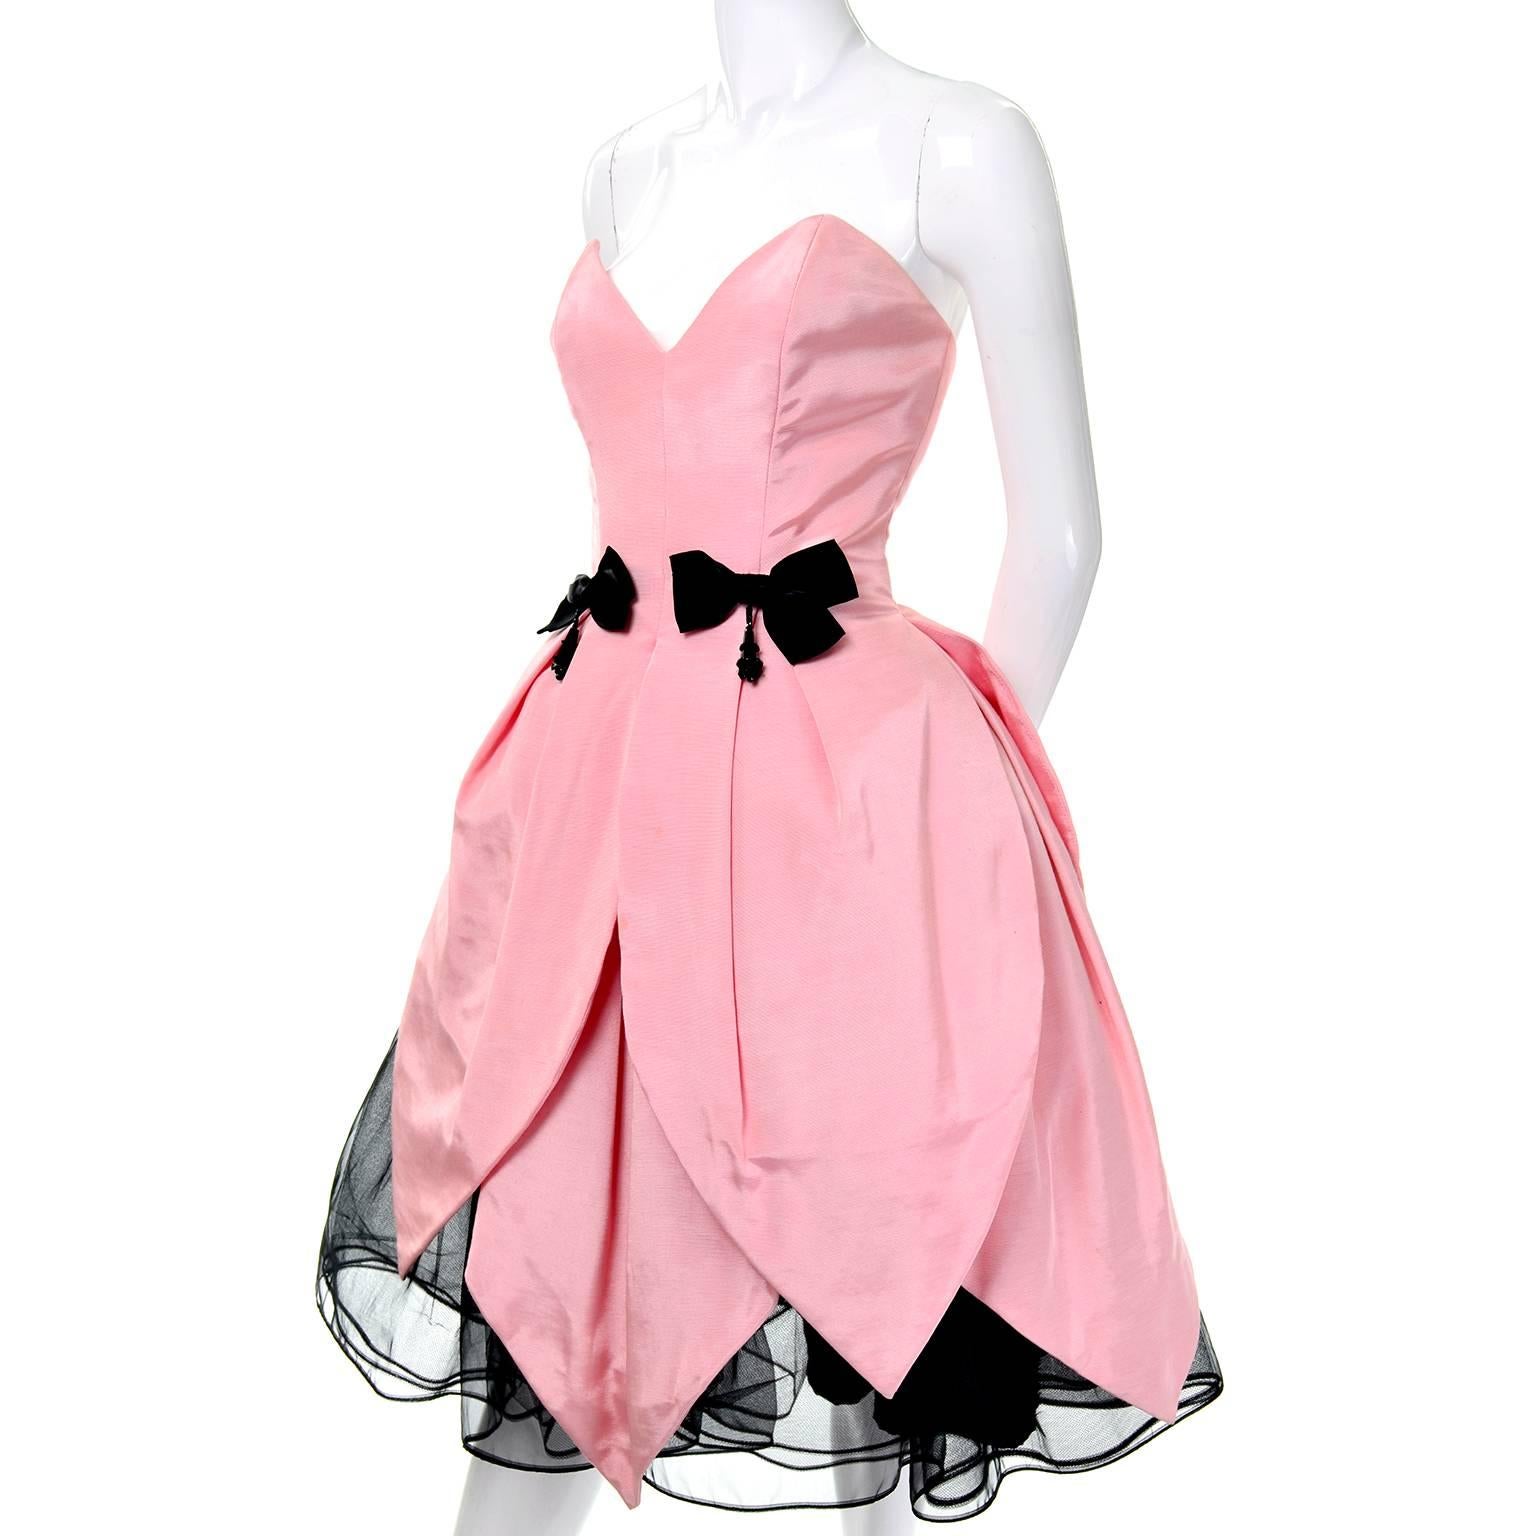 This is an incredibly fun petal pink strapless vintage Victor Costa dress that was purchased at Bergdorf Goodman in the 1980's. It has boning in the bodice, and two black bows at the waist that have beads hanging from the center. The full skirt has